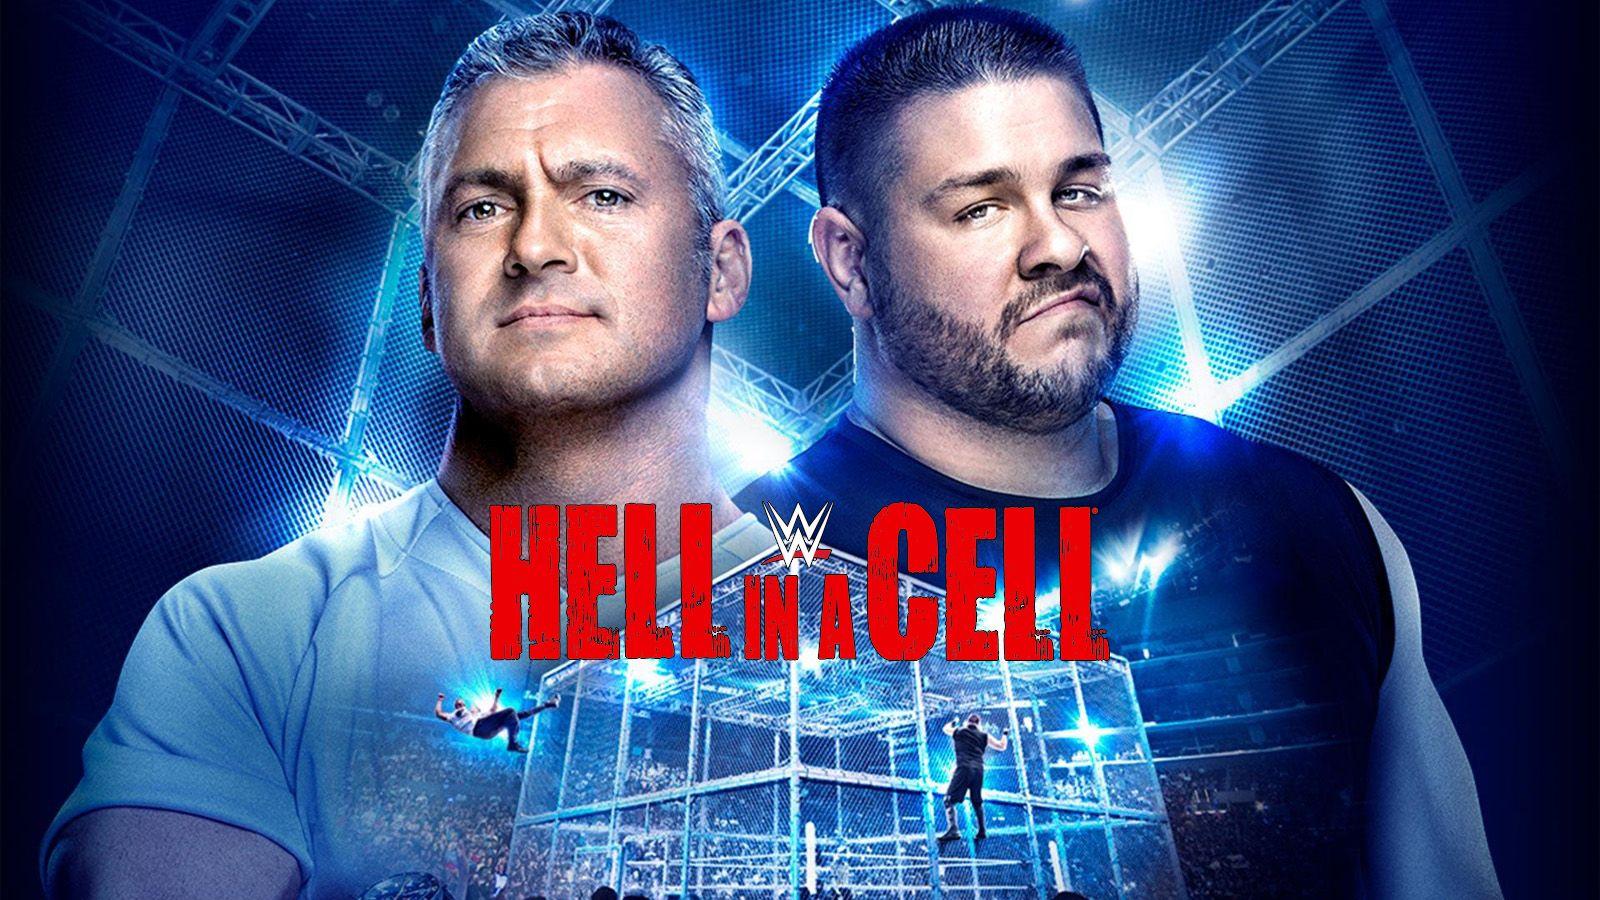 WWE Hell in a Cell 2017. WWE Champion of the Champions